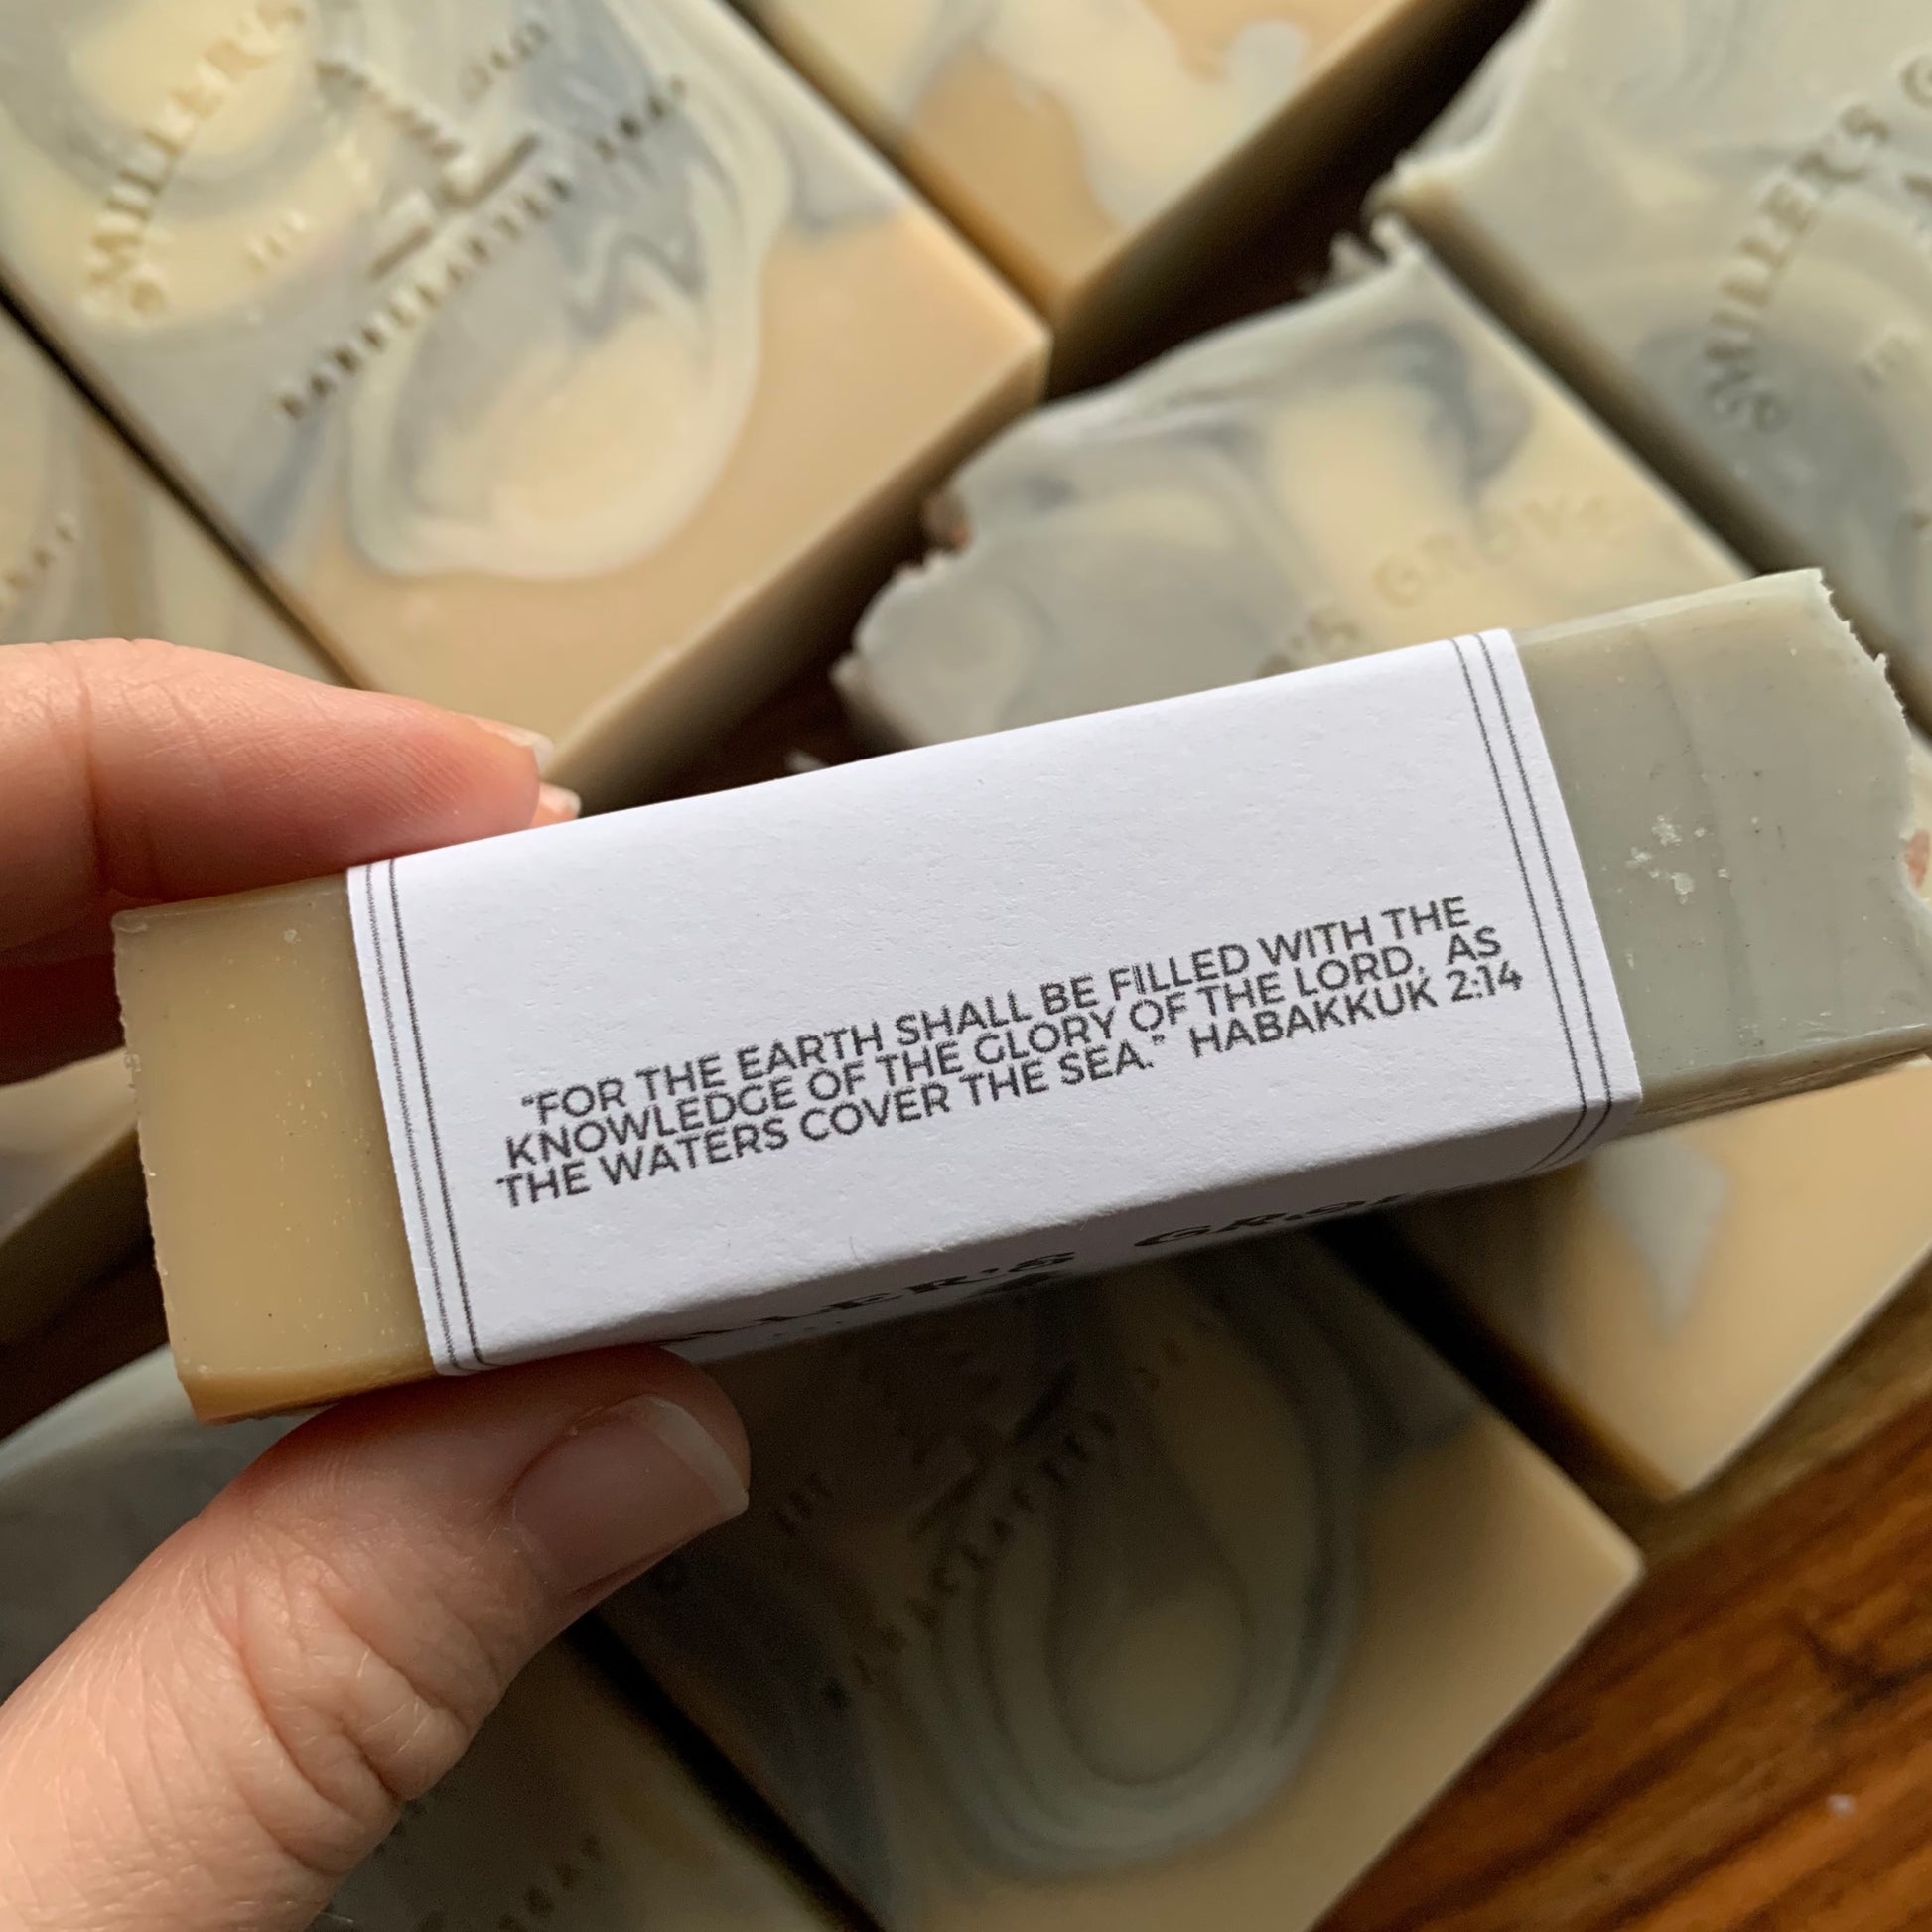 Soap bar with Habakkuk 2:14 on the side label